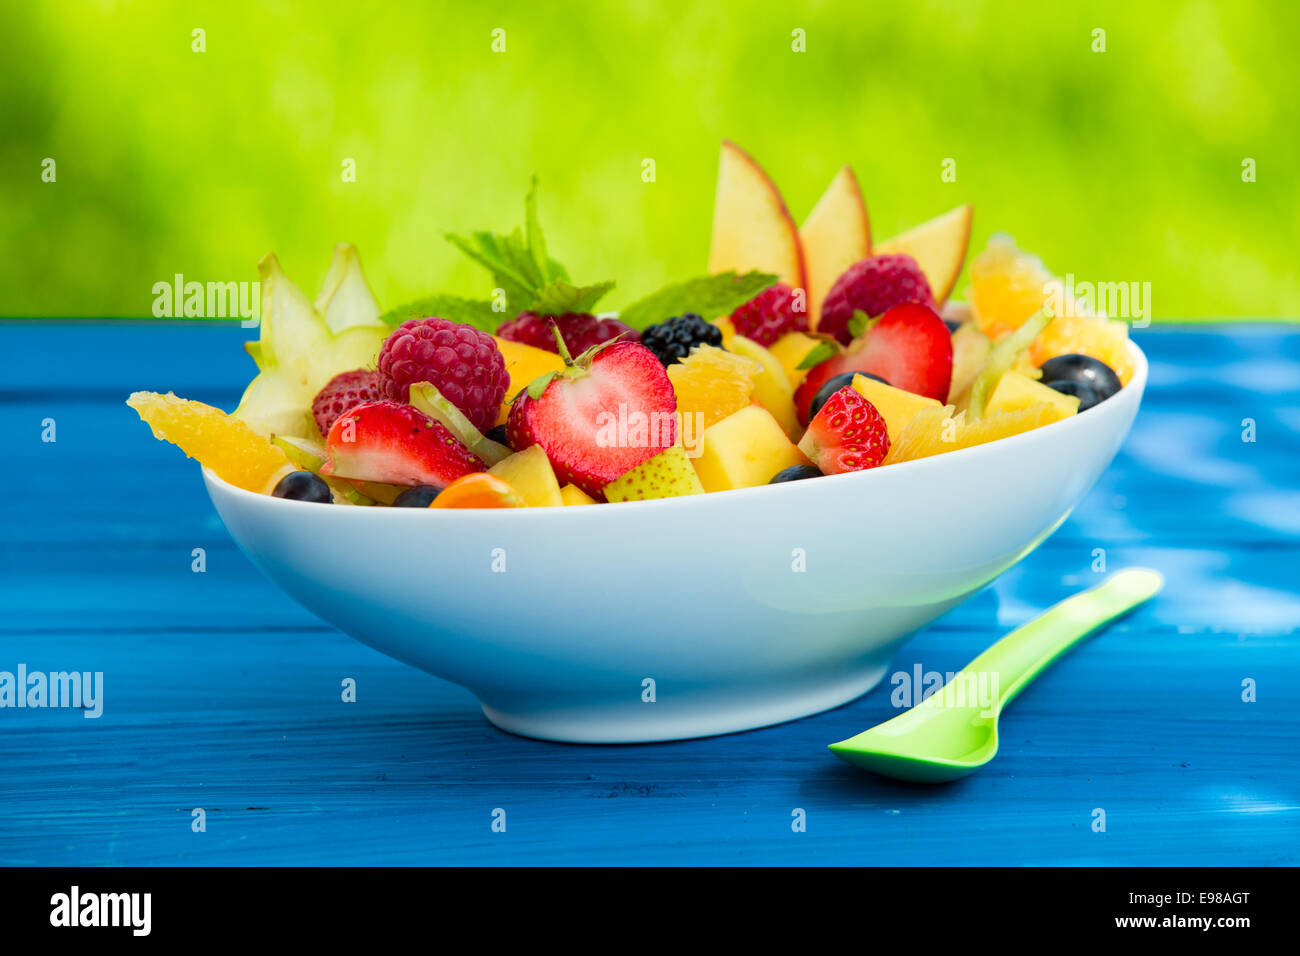 Mix of pieces of fresh delicious fruits in a bowl, on a table against a blurred green background Stock Photo